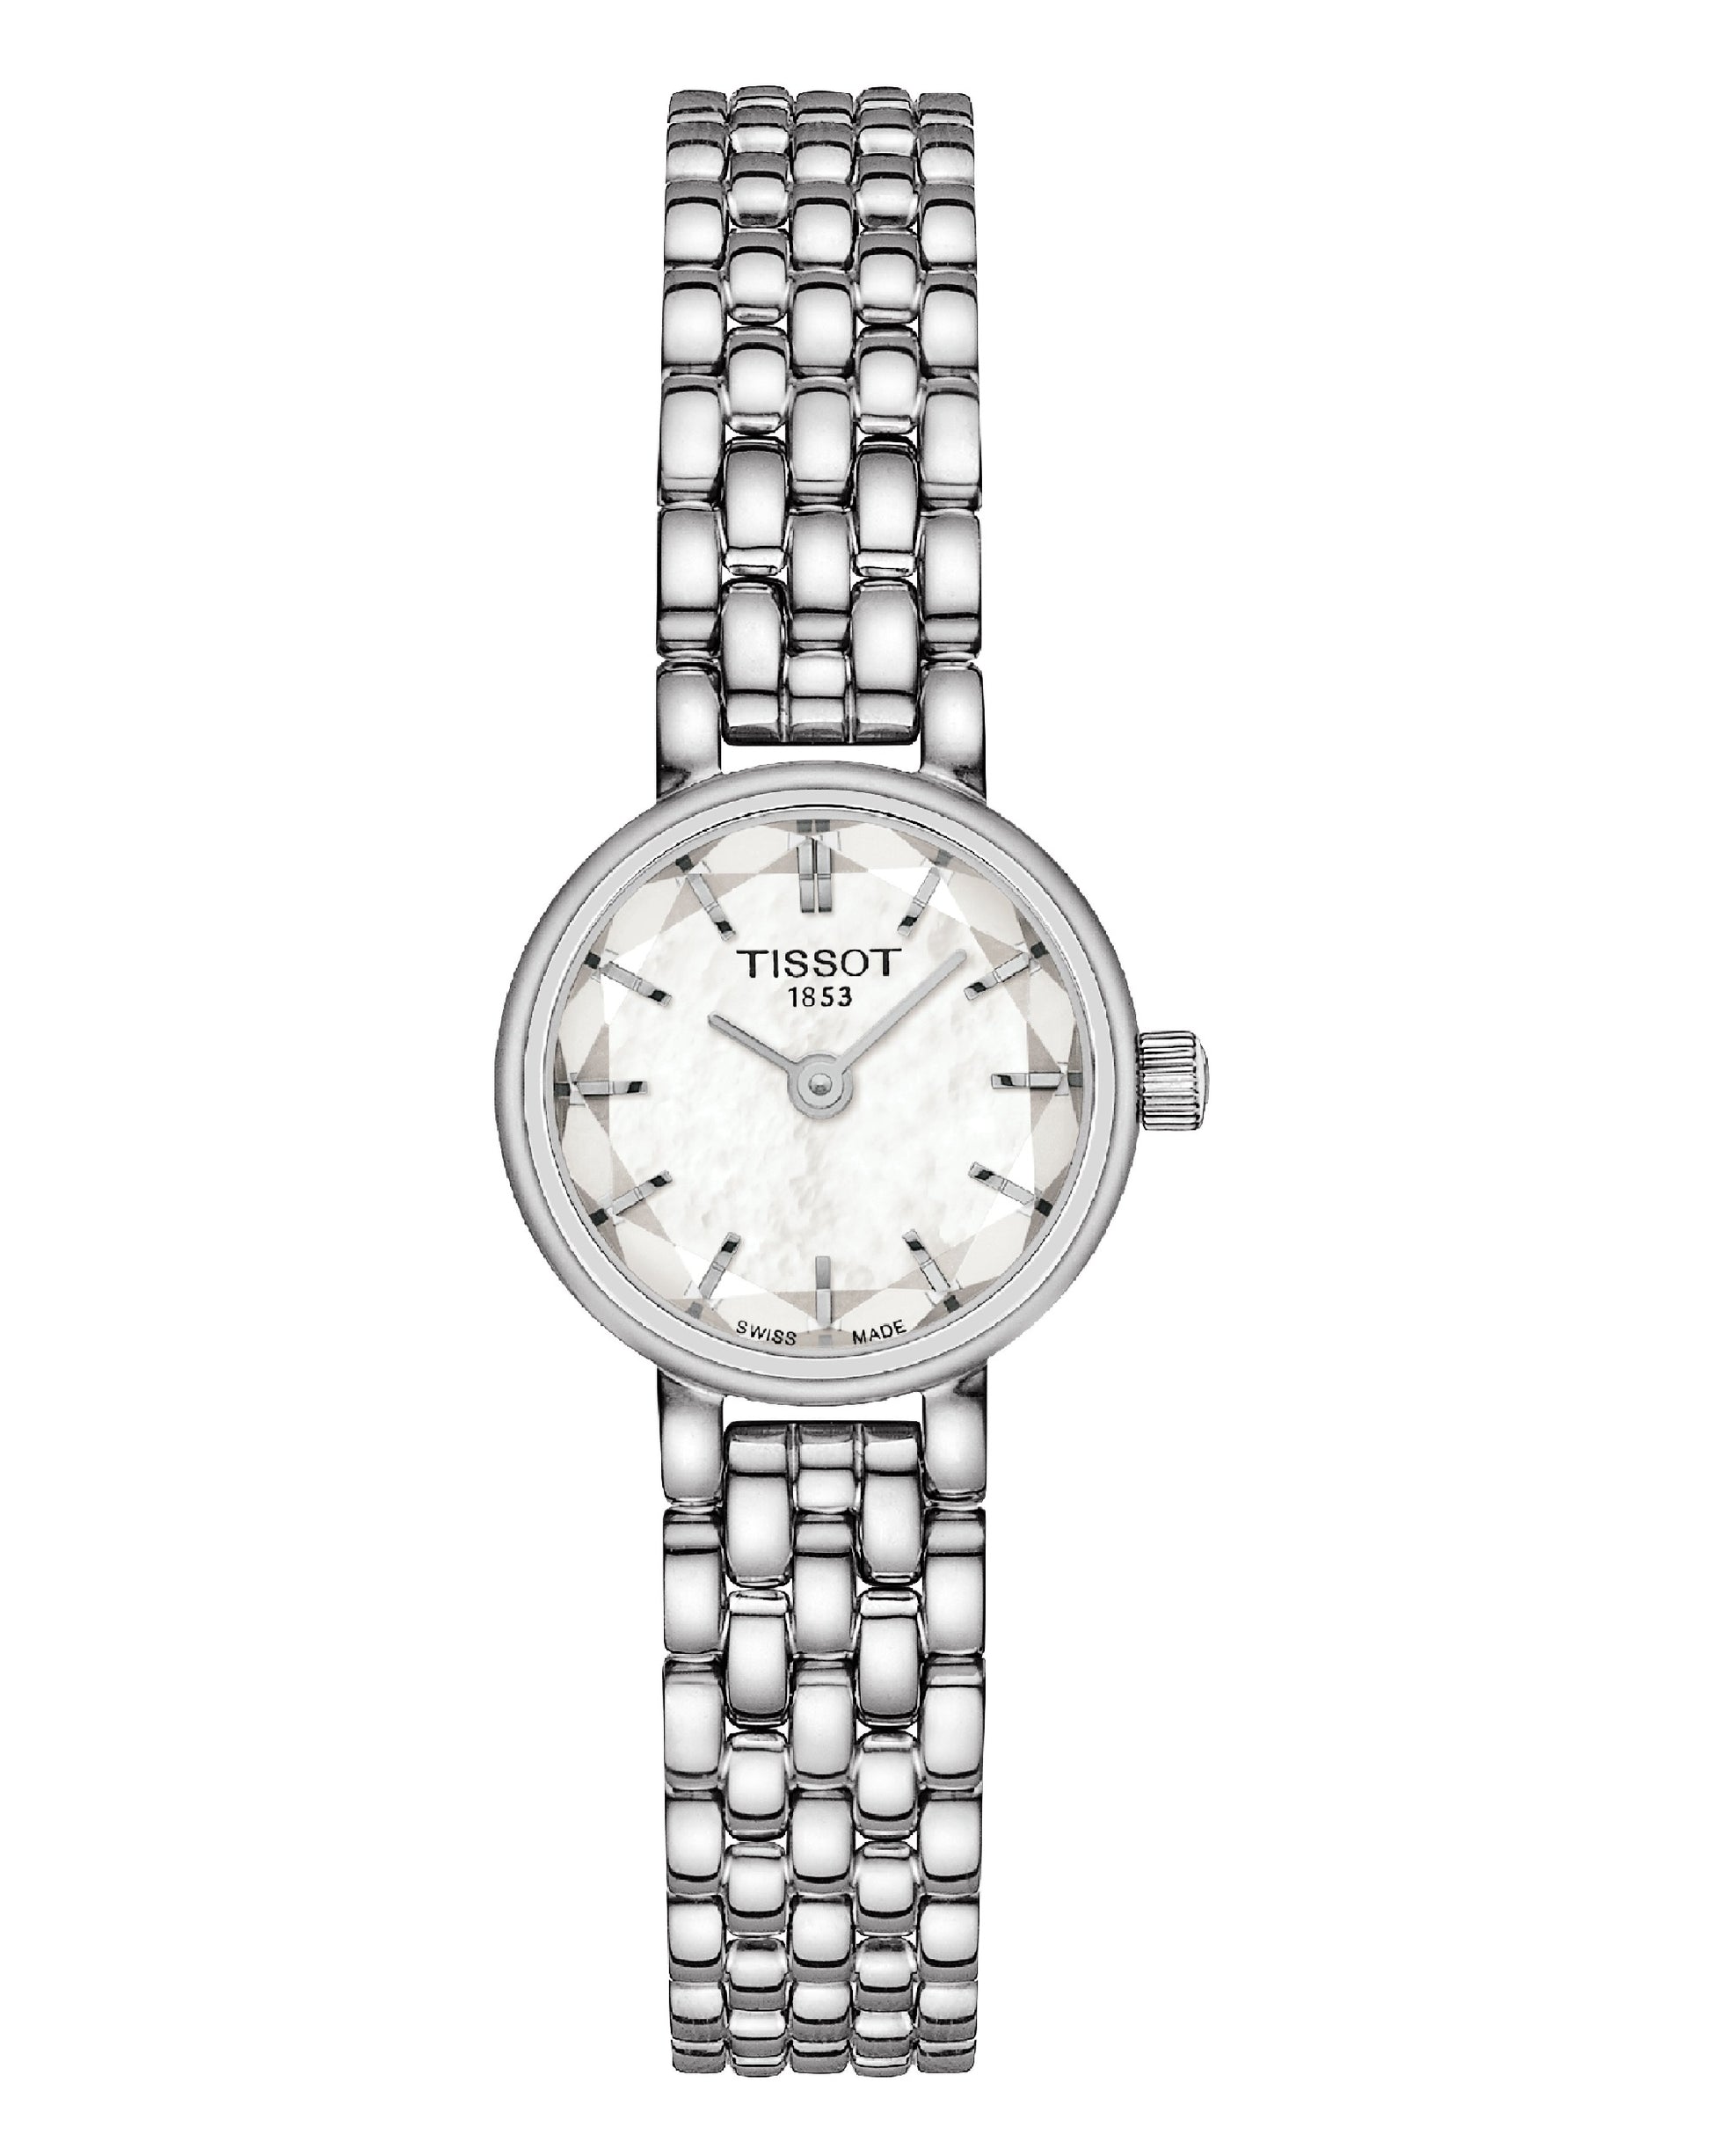 Tissot T140.009.11.111.00 Tissot LOVELY LADY'S Silver Dial Watch